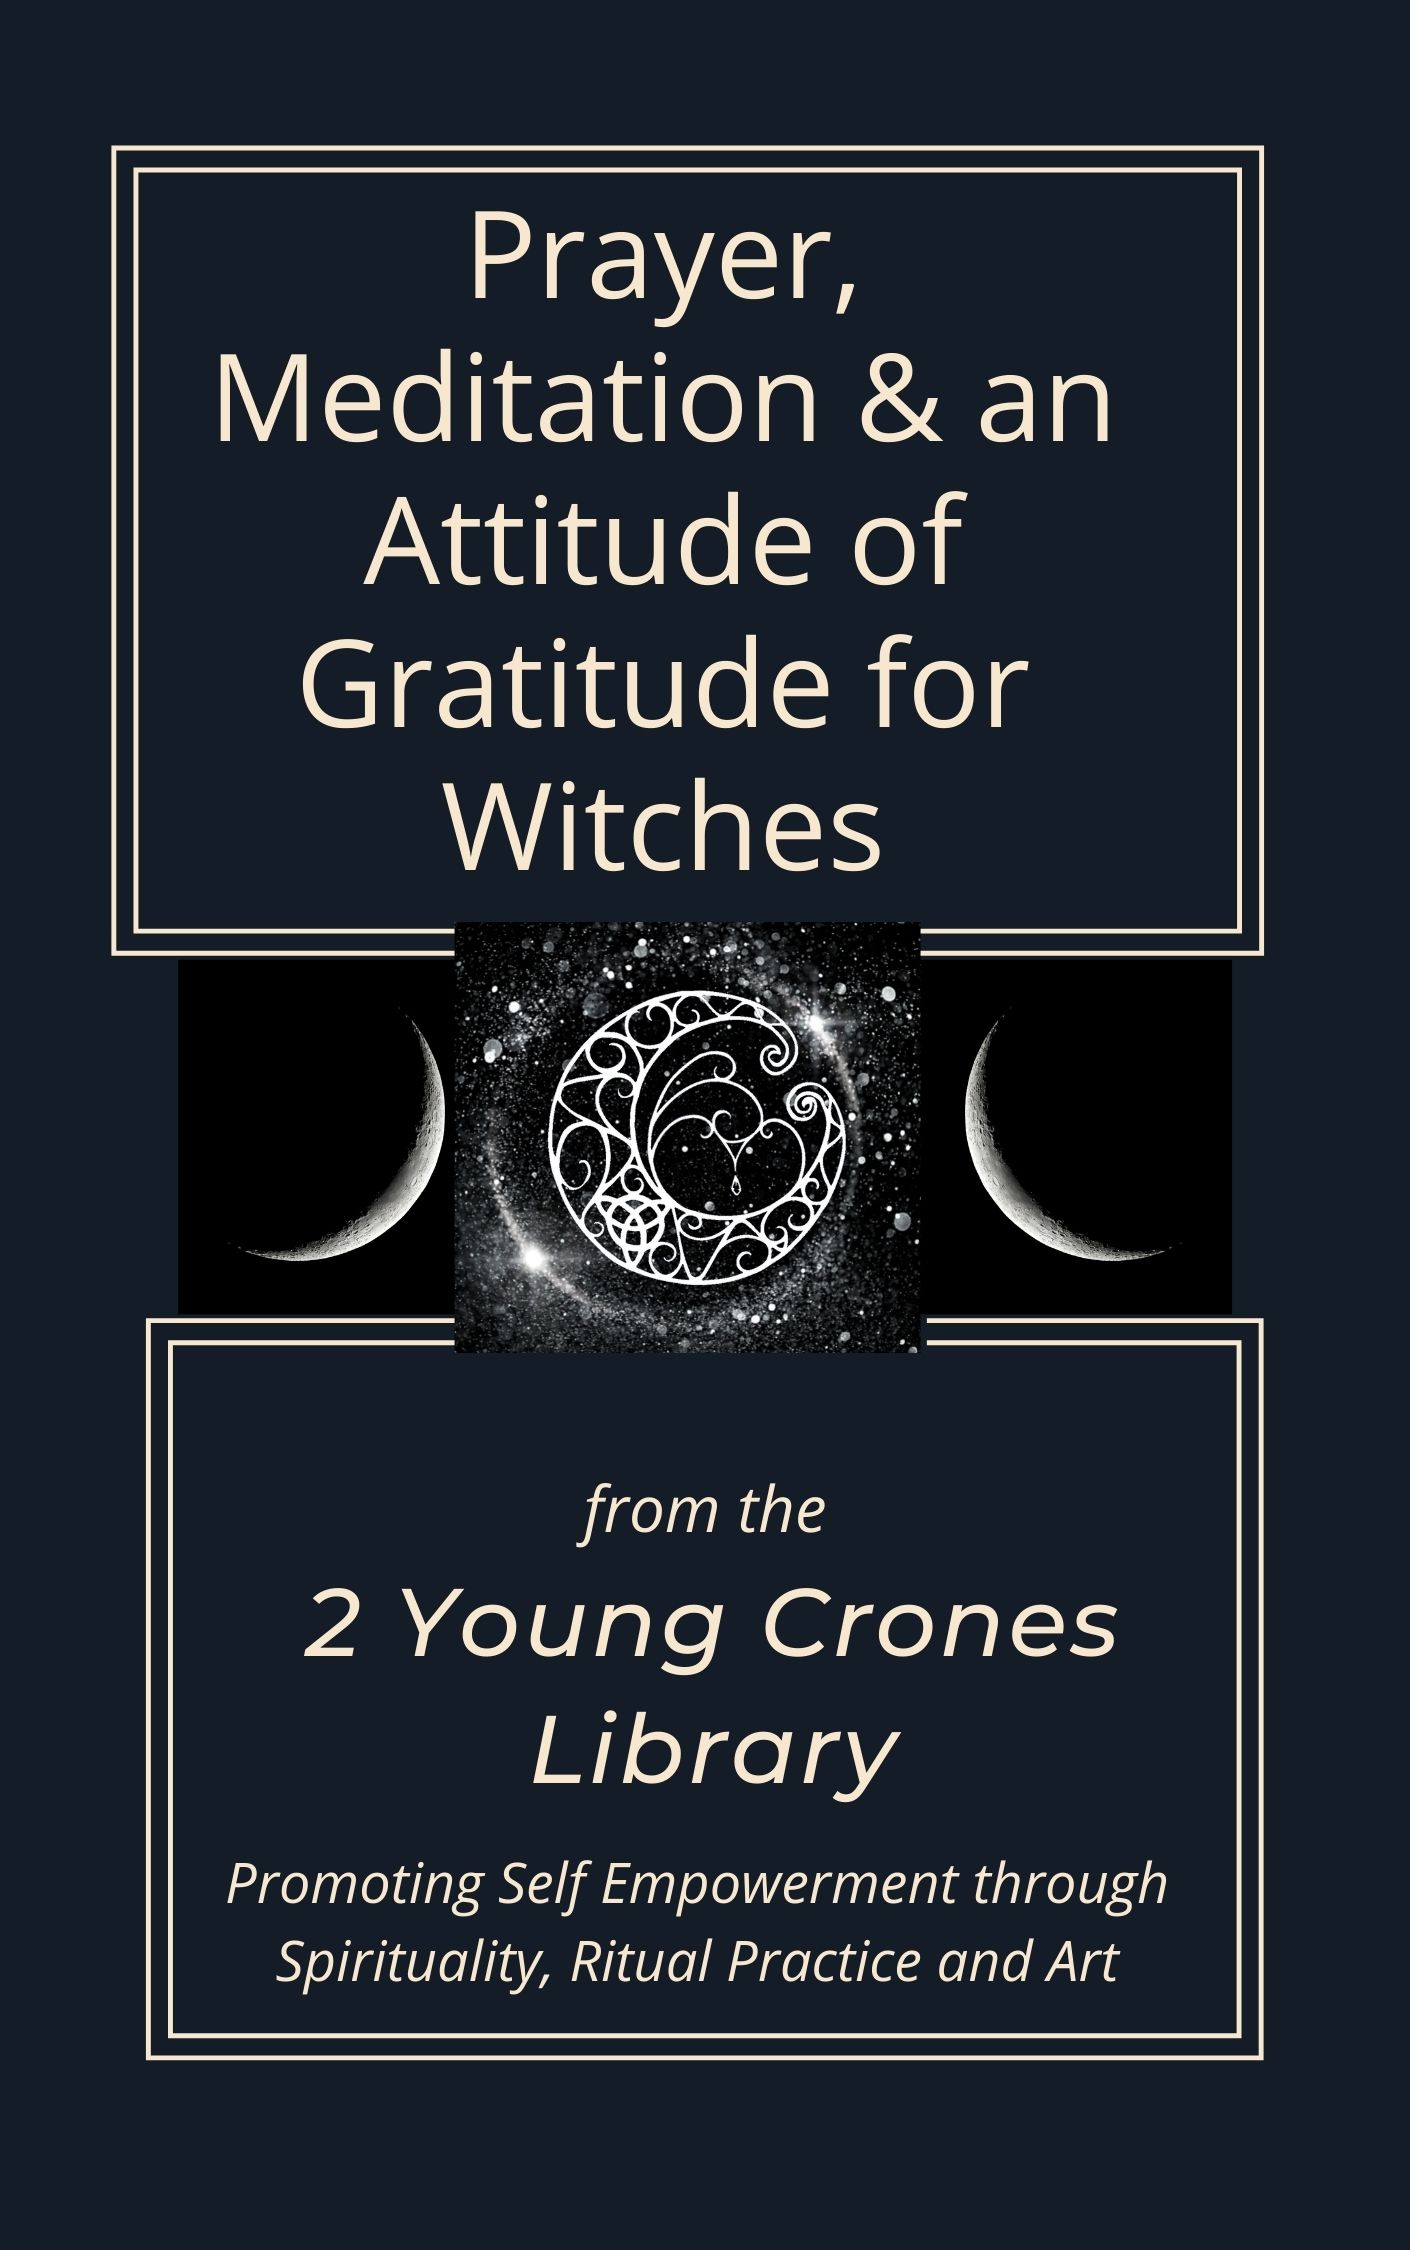 Prayer, Meditation, & an Attitude of Gratitude for Witches